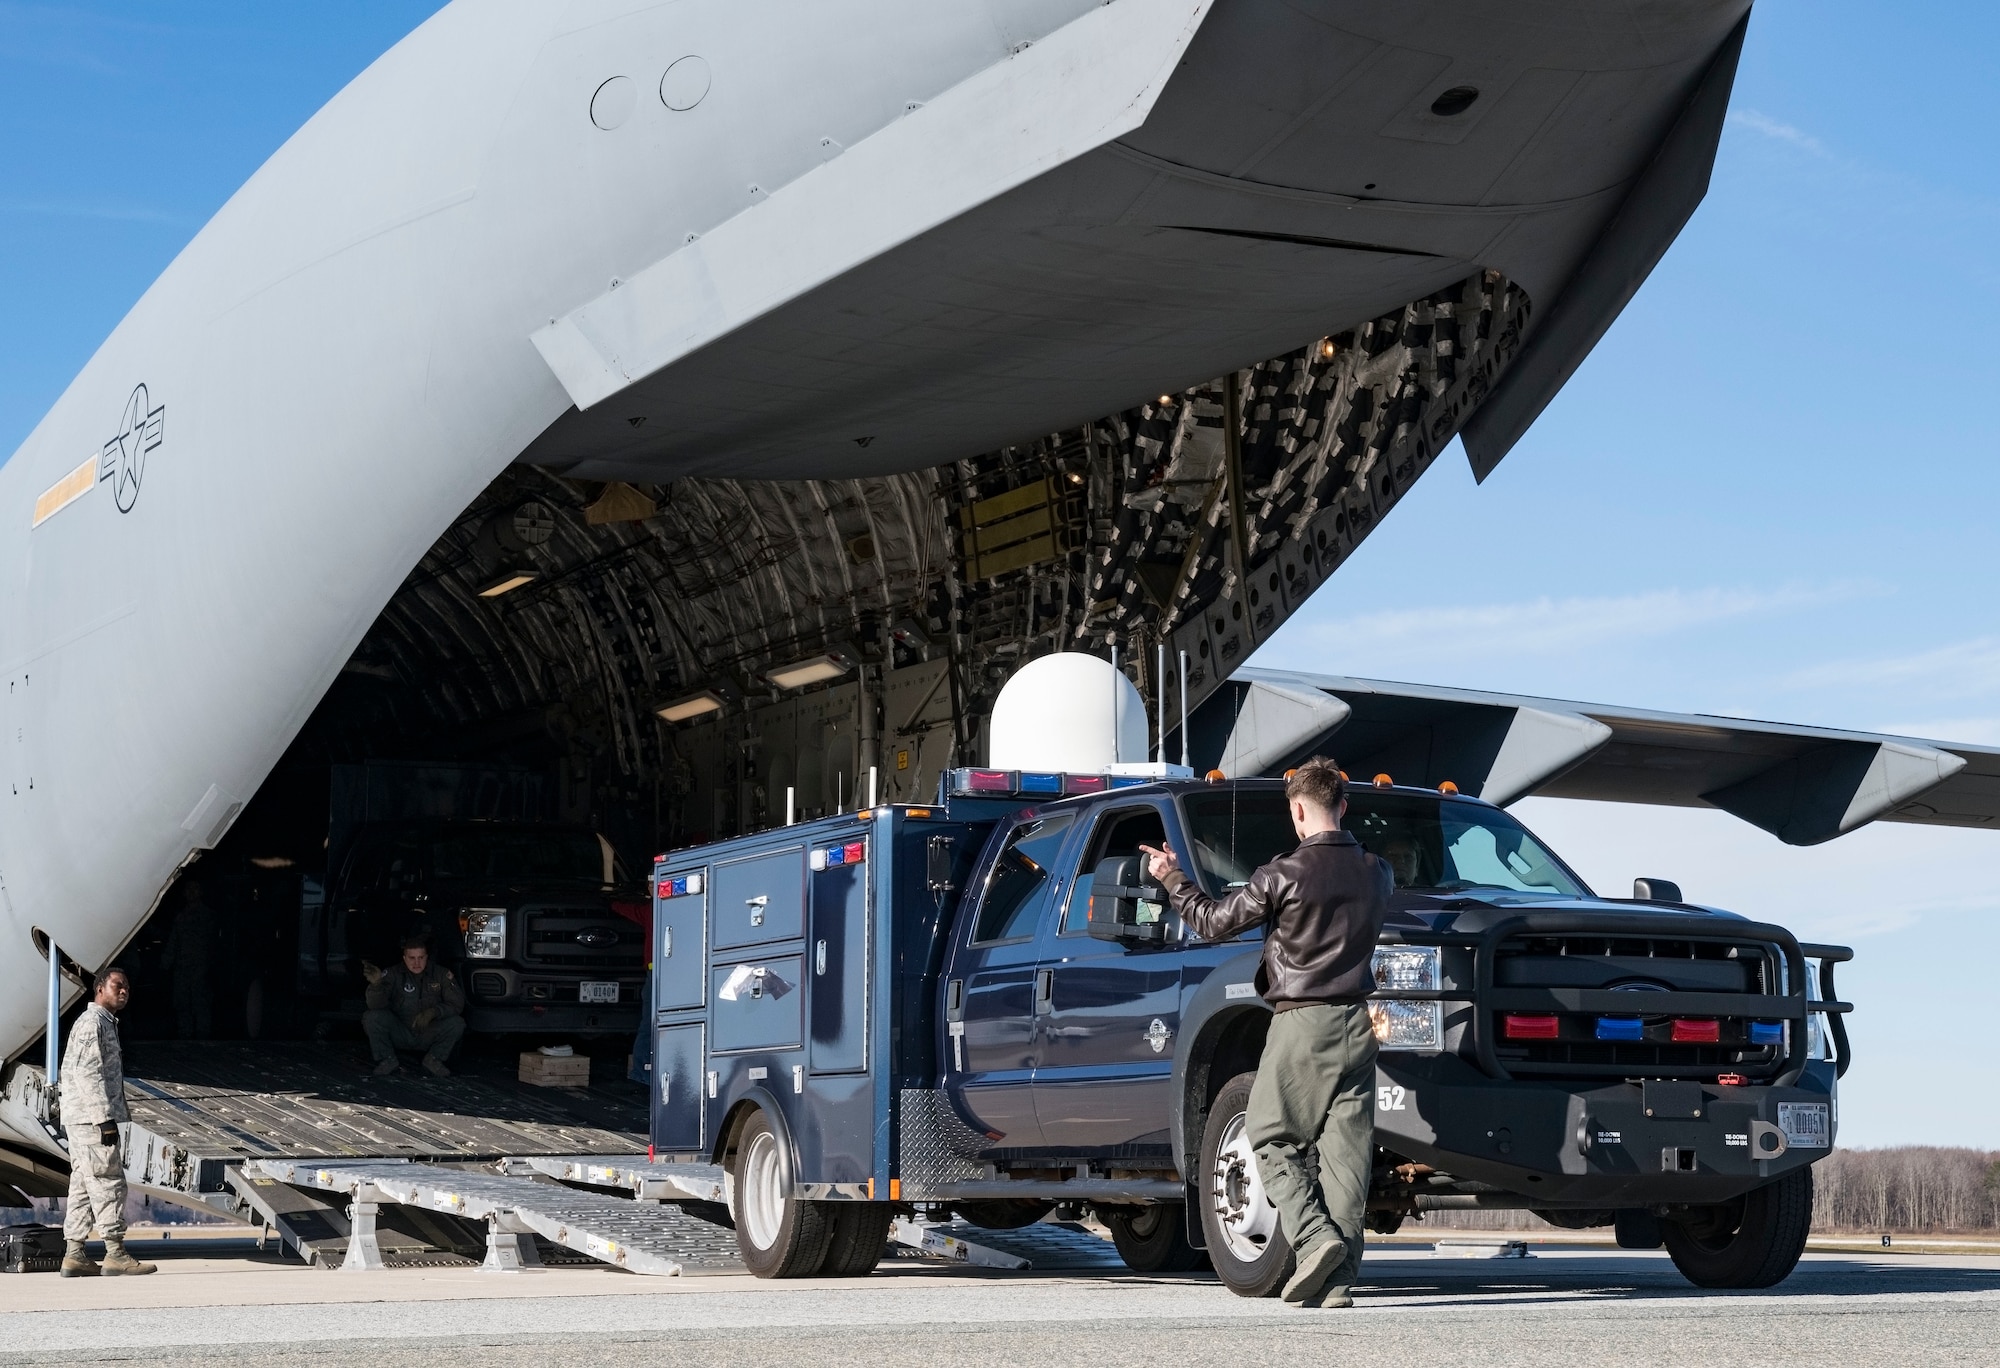 Staff Sgt. Ryan Stanich, 137th Airlift Squadron C-17 loadmaster, Stewart Air National Guard Base, Newburgh, N.Y., marshals a vehicle backing up on the DOMOPS Airlift Modular Approach Shoring Jan. 11, 2019, at Dover Air Force Base, Del. The vehicles belong to the Delaware National Guard's 31st Civil Support Team, Weapons of Mass Destruction headquartered in Smyrna, Del. The vehicles and team members were airlifted to Florida to support the Florida National Guard during a large-scale training exercise Jan. 14-18. The 31st CST maintains the capability to mitigate the consequences of any WMD or Nuclear, Biological, and Chemical event, whether natural or man-made. They are experts in WMD effects and NBC defense operations. (U.S. Air Force photo by Roland Balik)